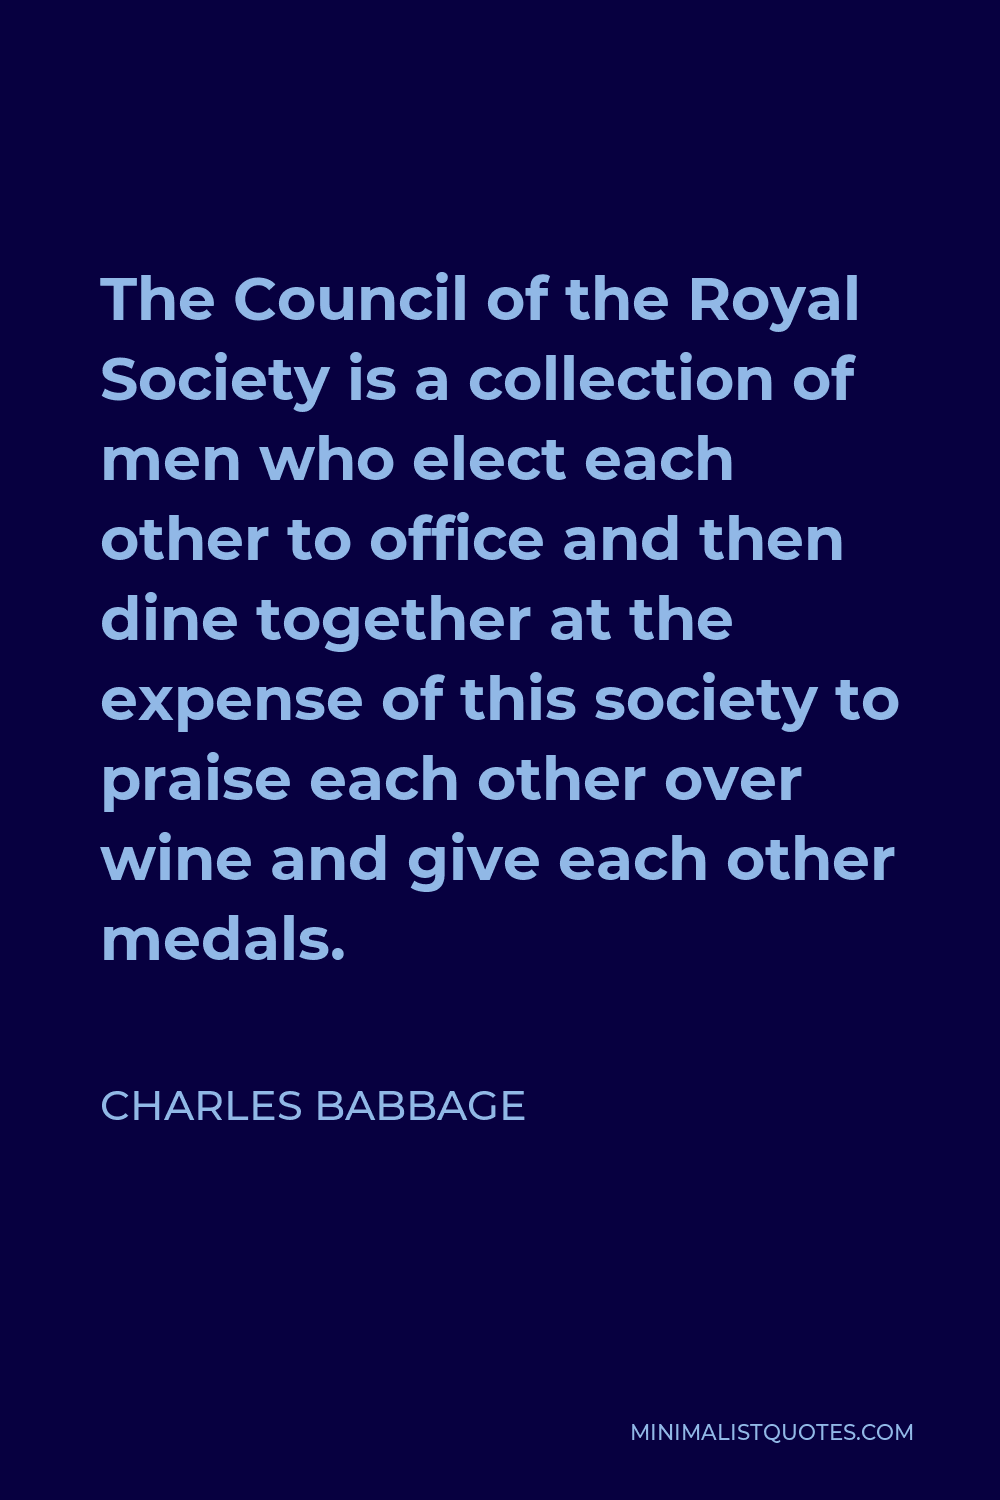 Charles Babbage Quote - The Council of the Royal Society is a collection of men who elect each other to office and then dine together at the expense of this society to praise each other over wine and give each other medals.